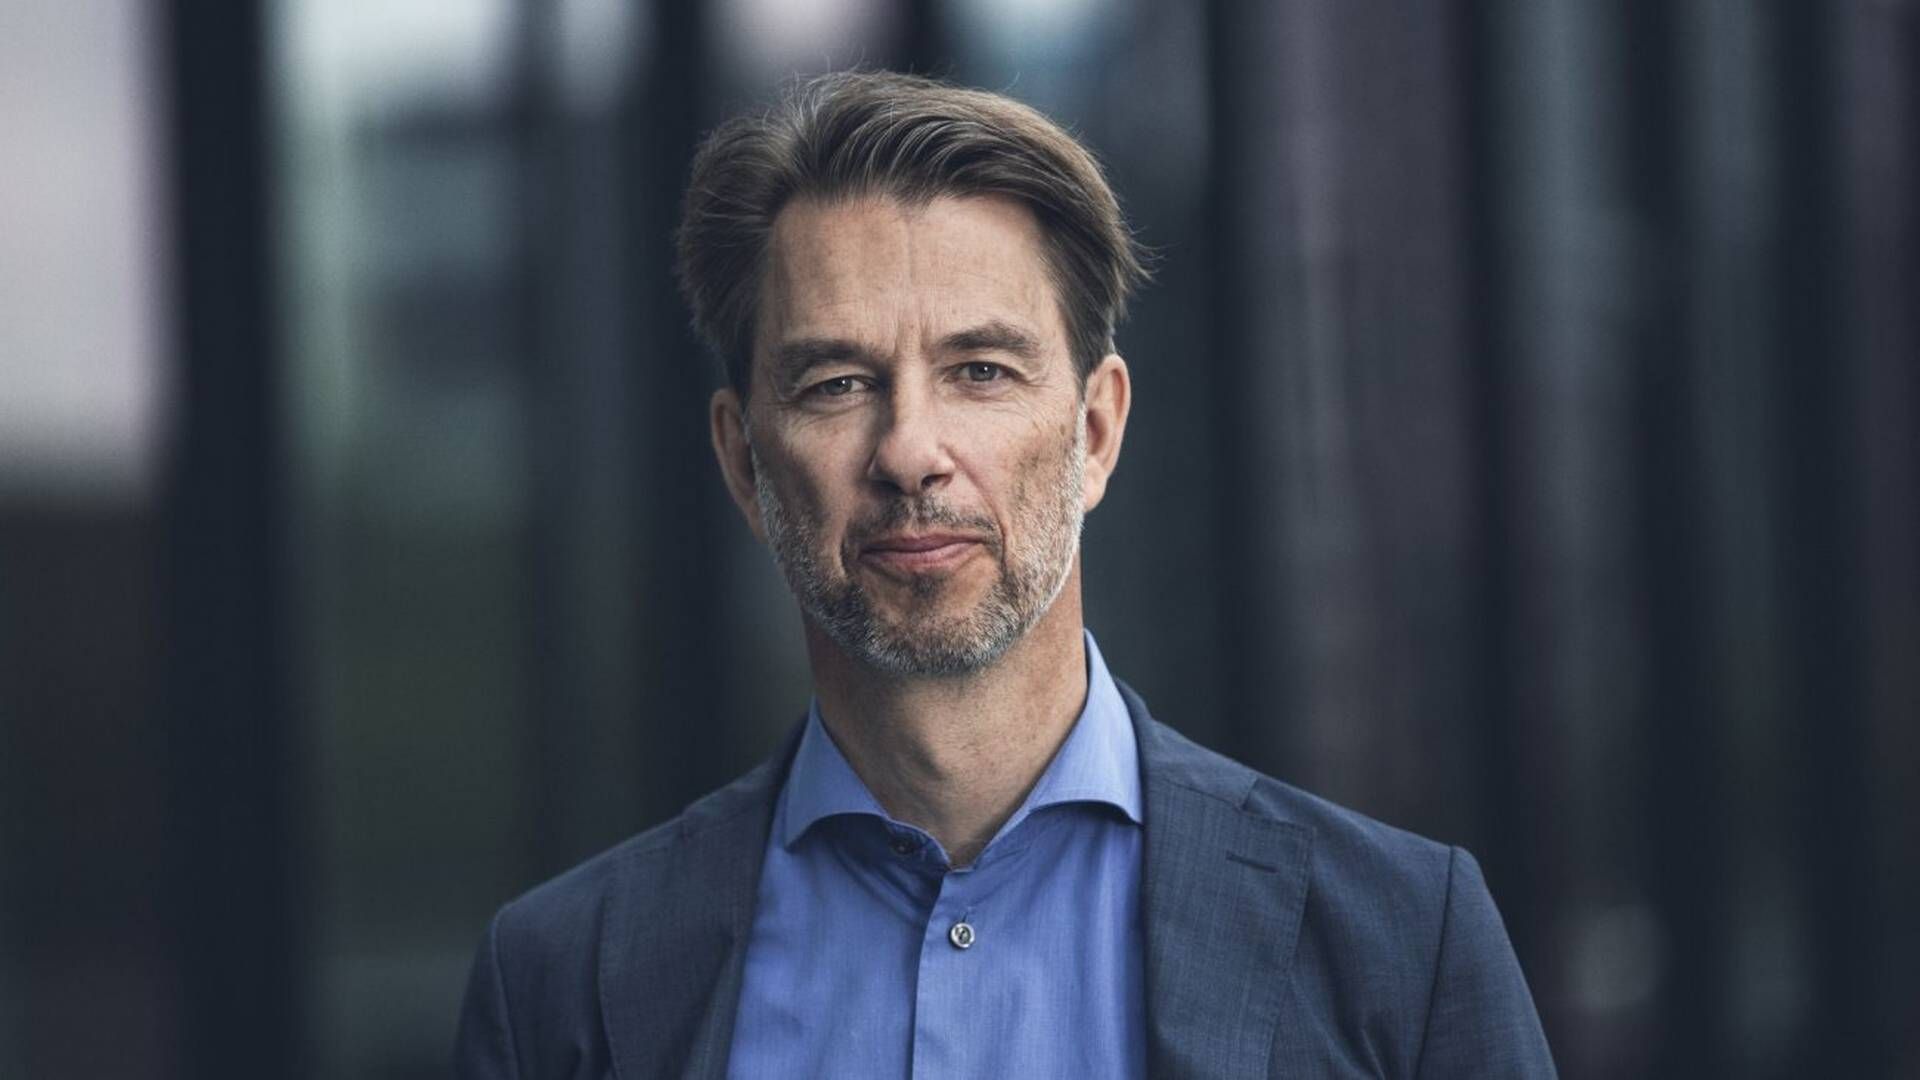 Nordea's head of responsible investment, Eric Pedersen, says the asset manager would rather maintain its holding in Tesla and engage with other shareholders on concerns over its CEO, Elon Musk. | Photo: PR / Nordea